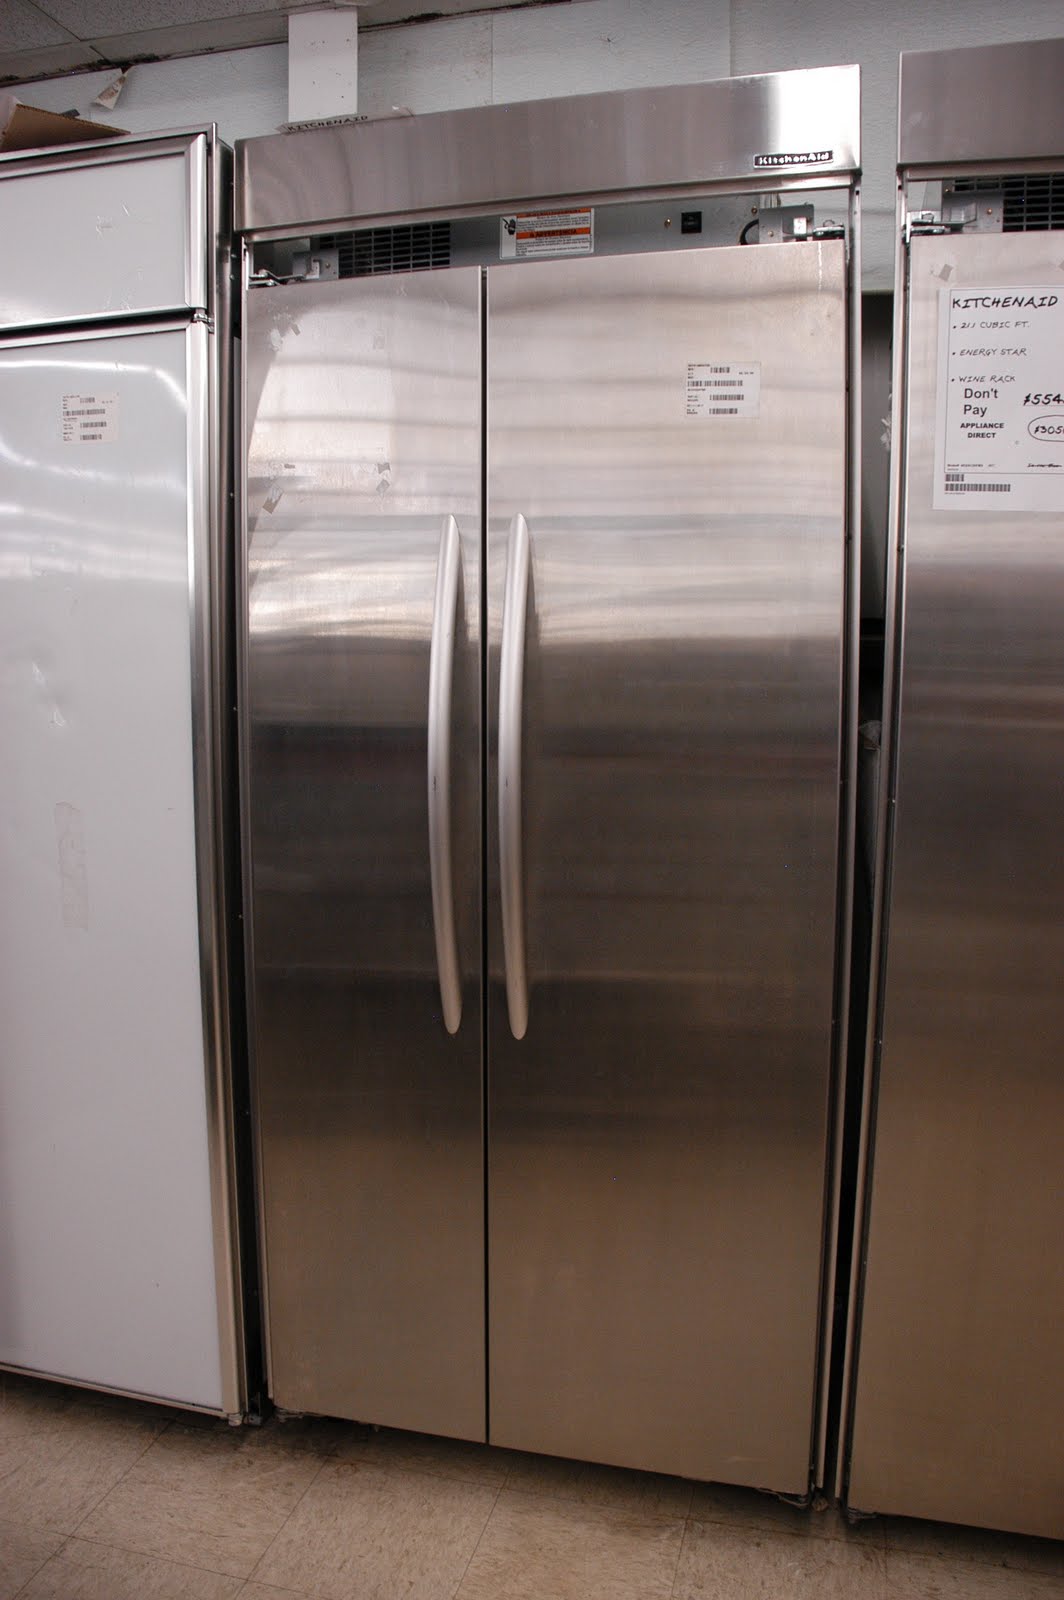 Appliance Direct Video Blog: KitchenAid Stainless Steel 20.9 cu. ft